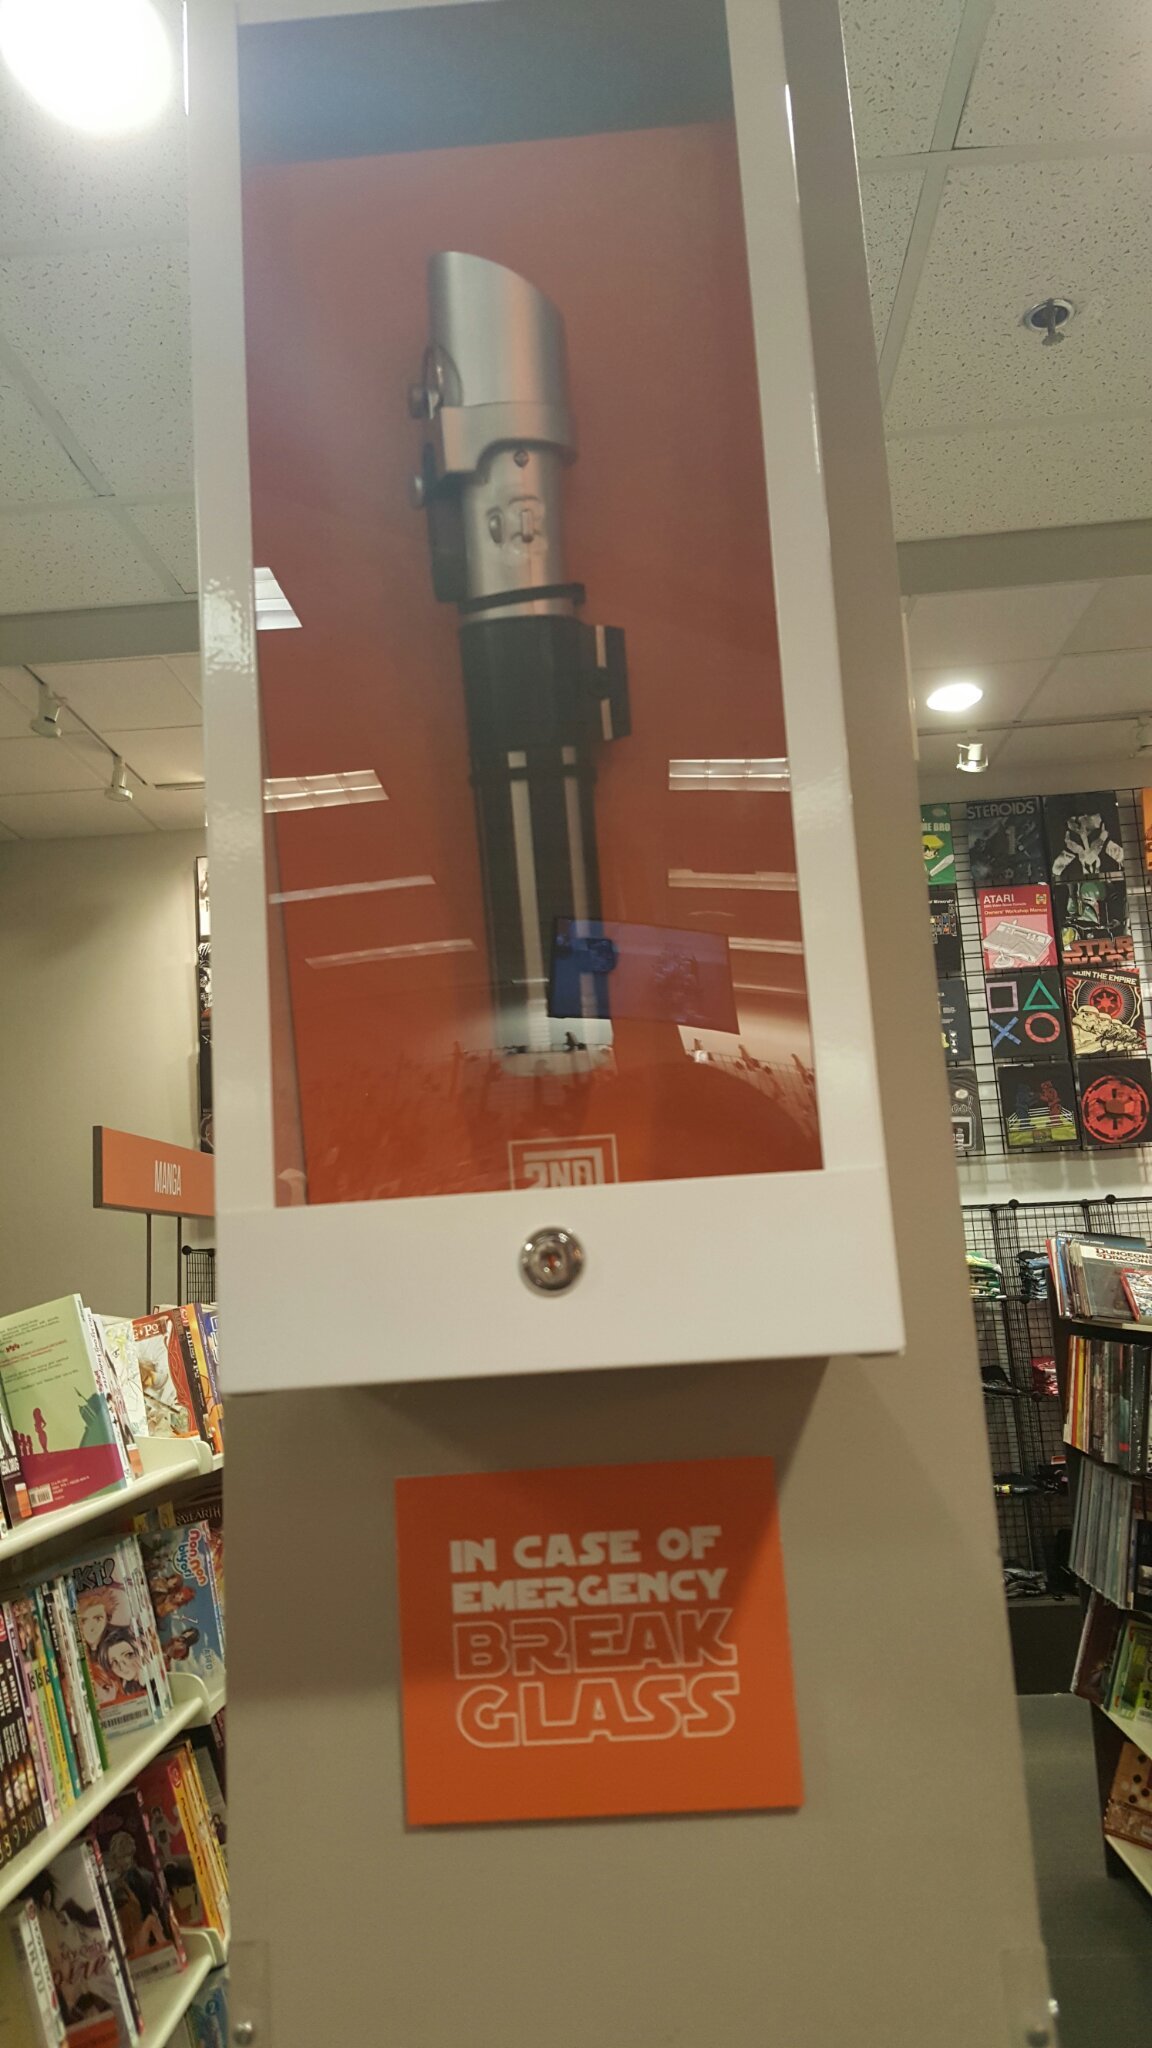 Found this at my local store - meme